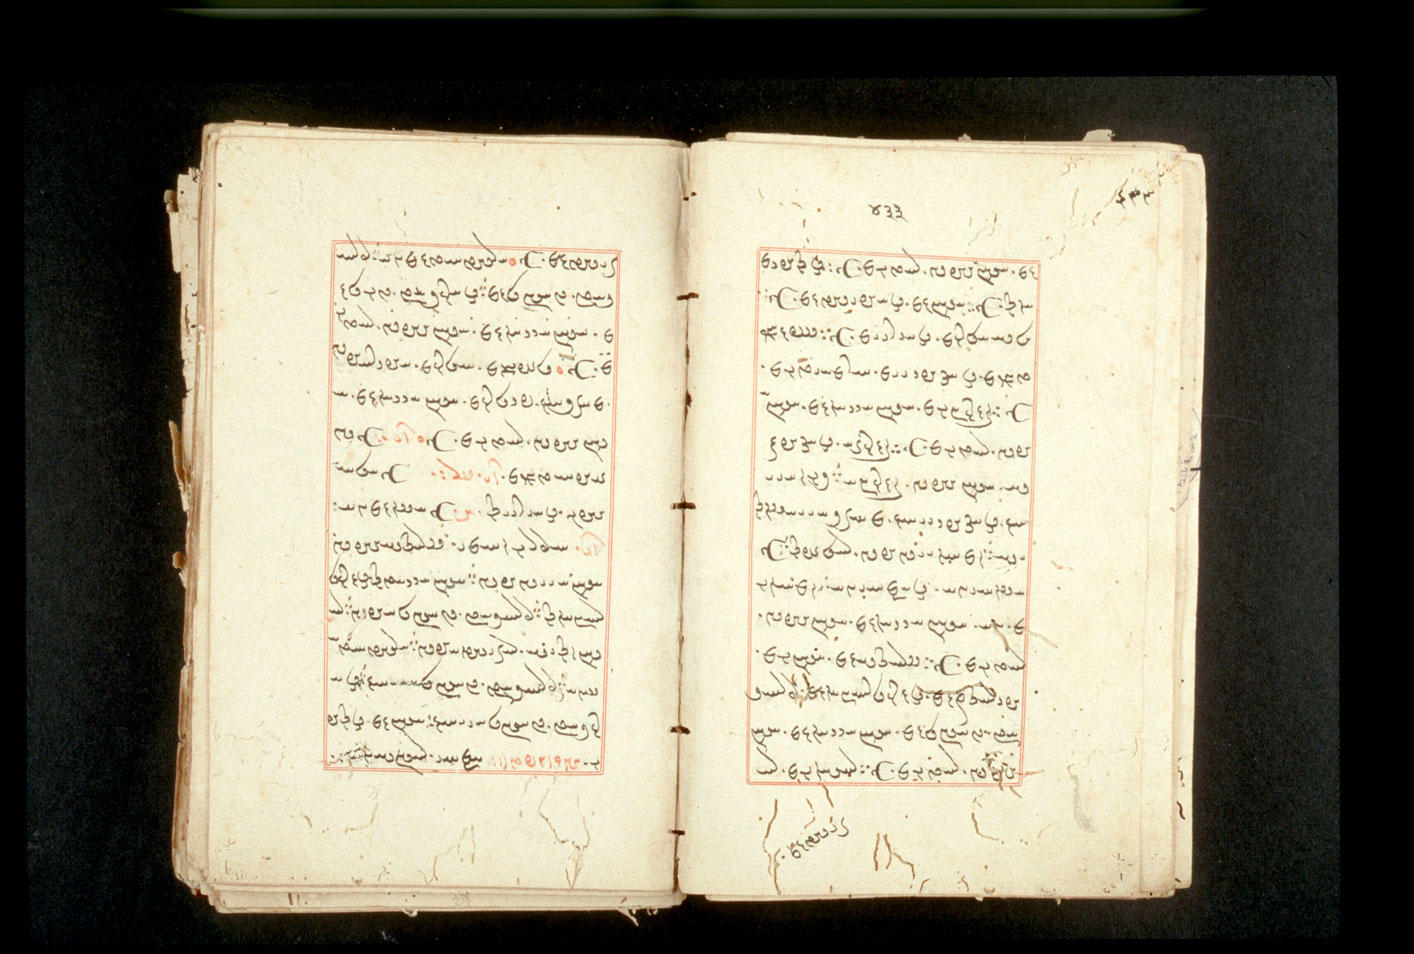 Folios 433v (right) and 434r (left)